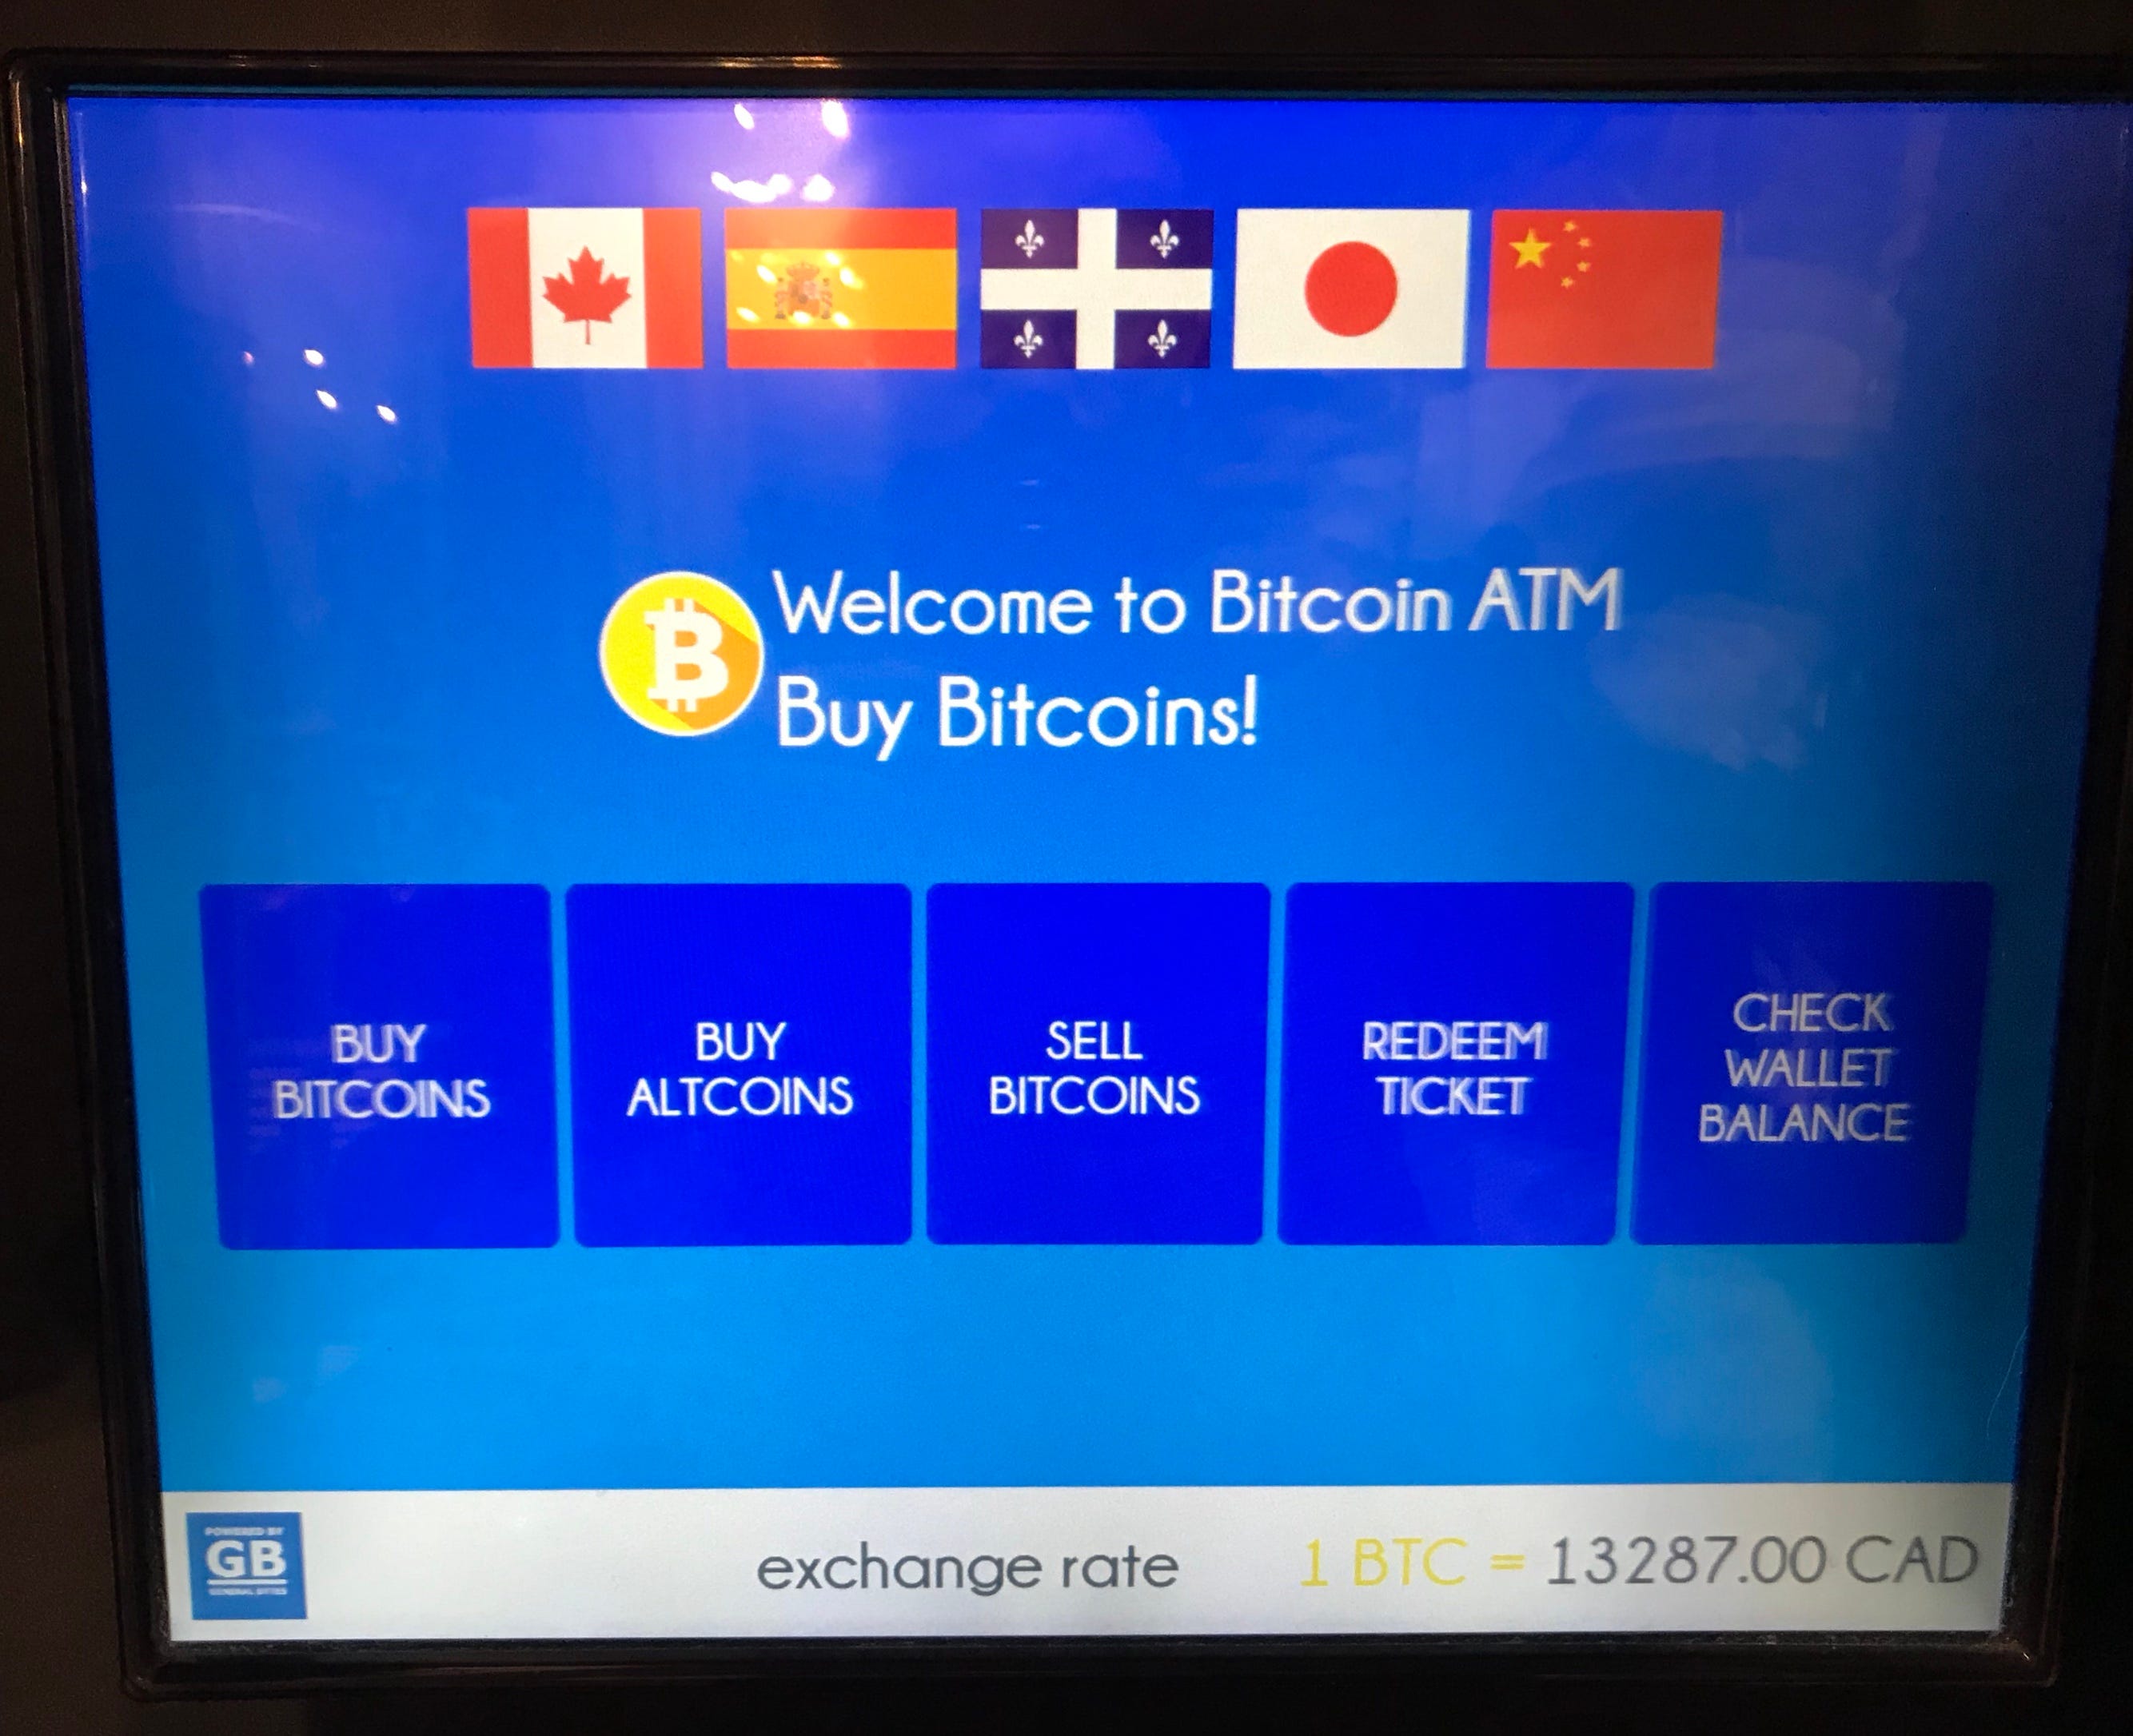 bitcoin atm taking long to confirm